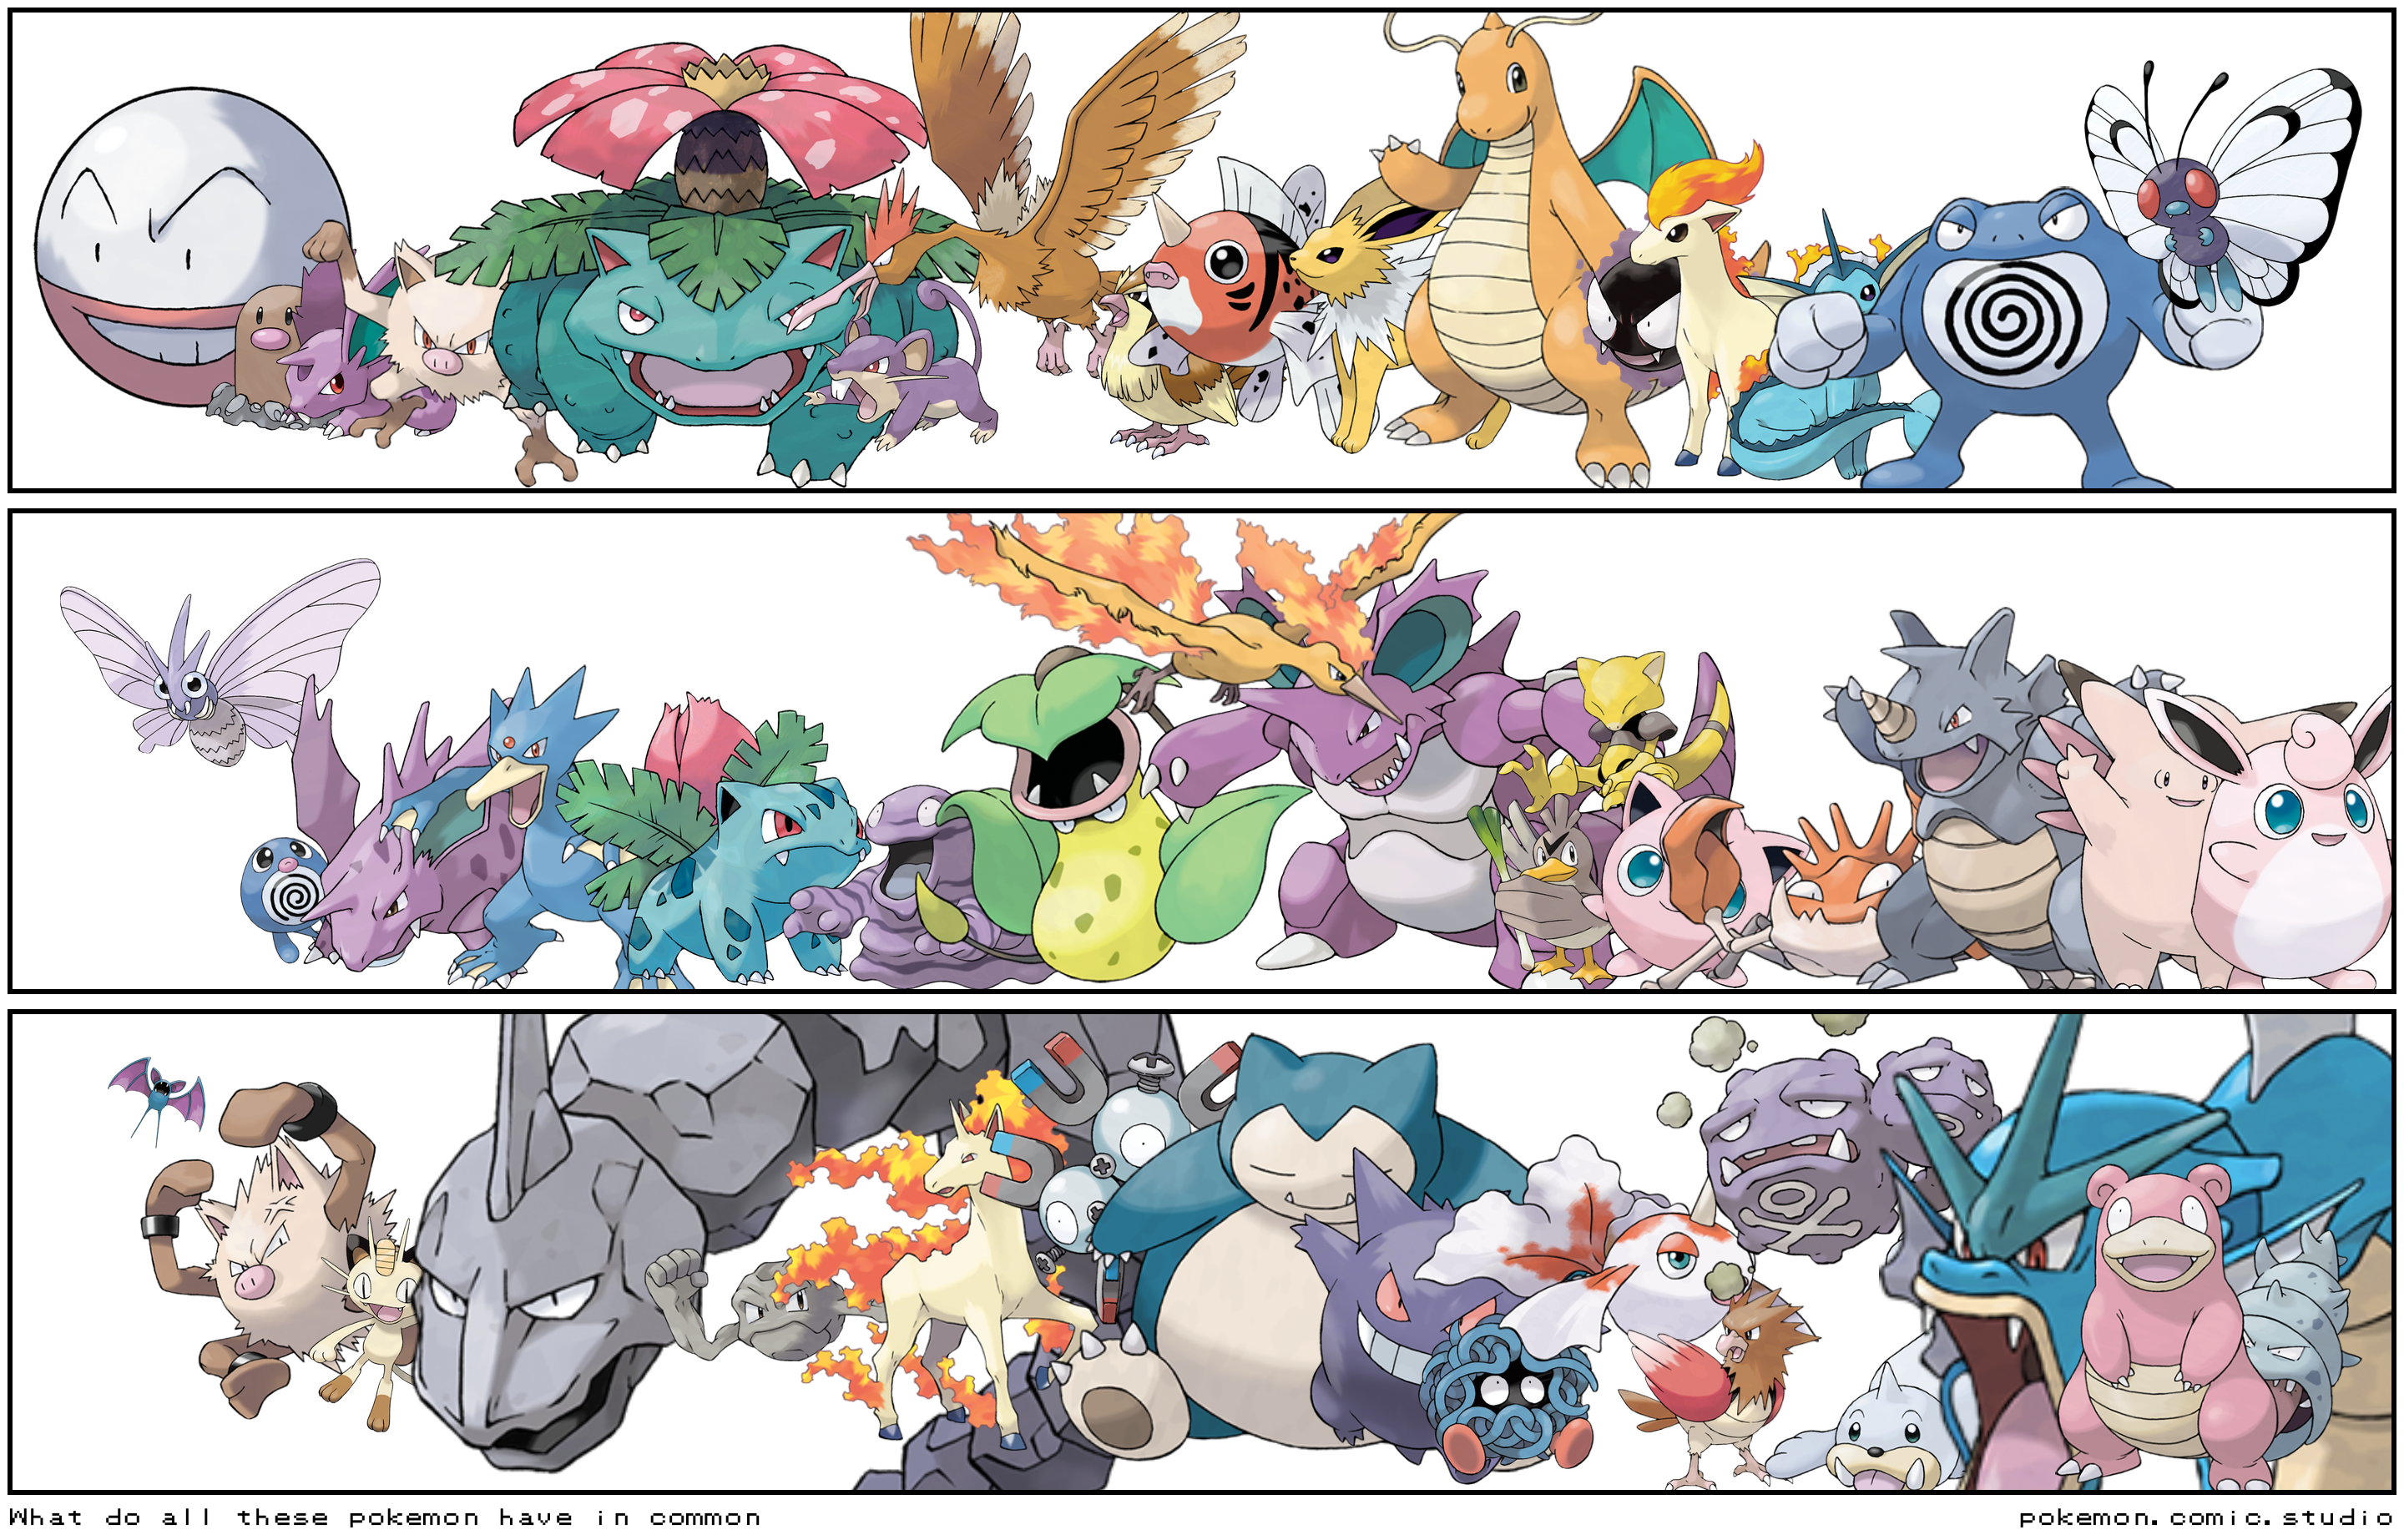 What do all these pokemon have in common